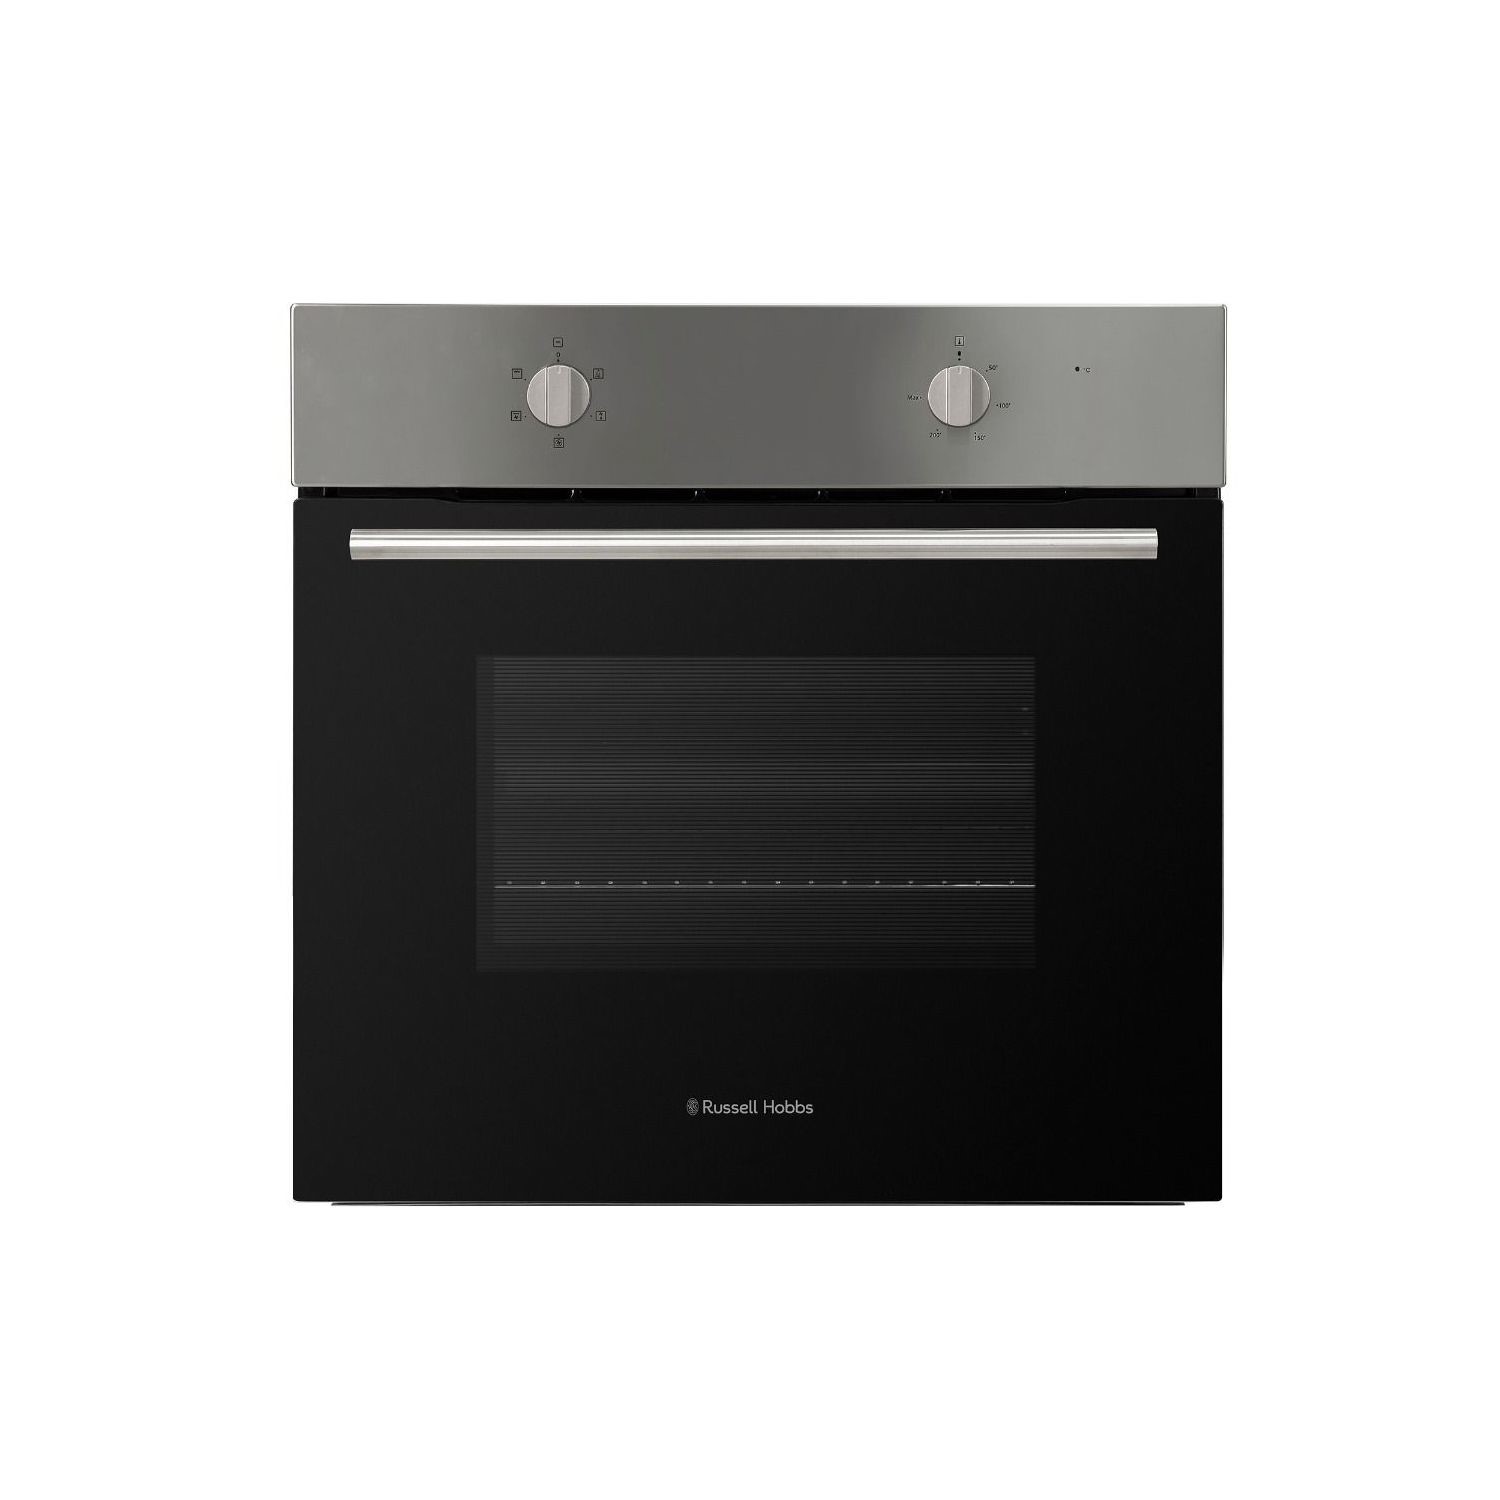 Refurbished Russell Hobbs RHFEO6502SS 60cm Single Built In Electric Oven Stainless Steel